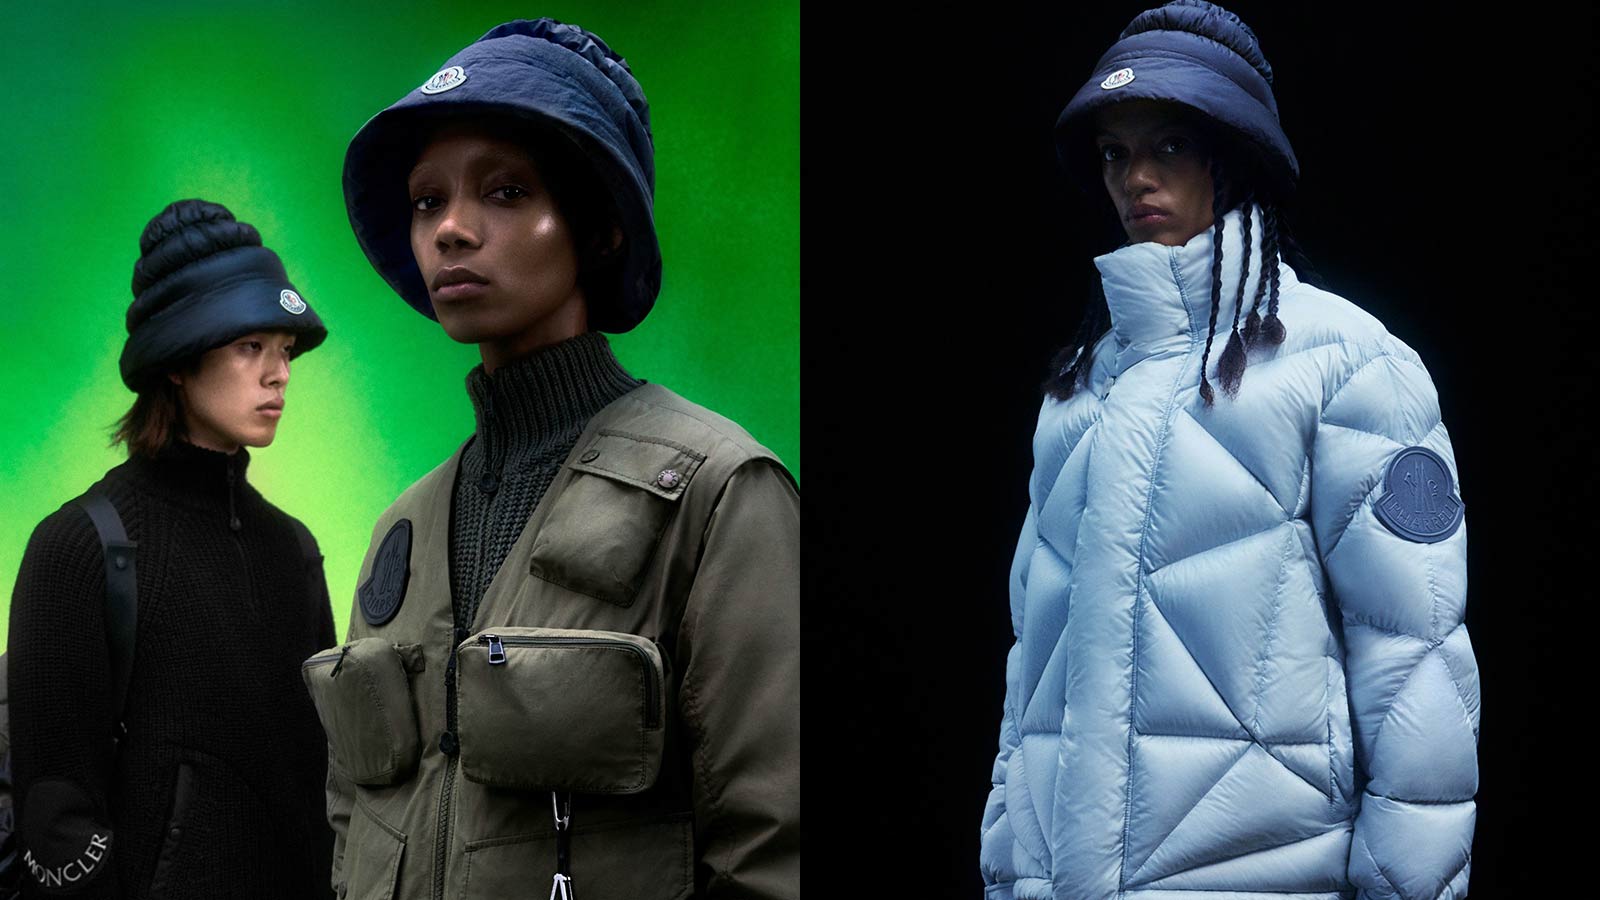 Moncler x Pharrell Williams Collection Blends City Styles And Outdoor ...